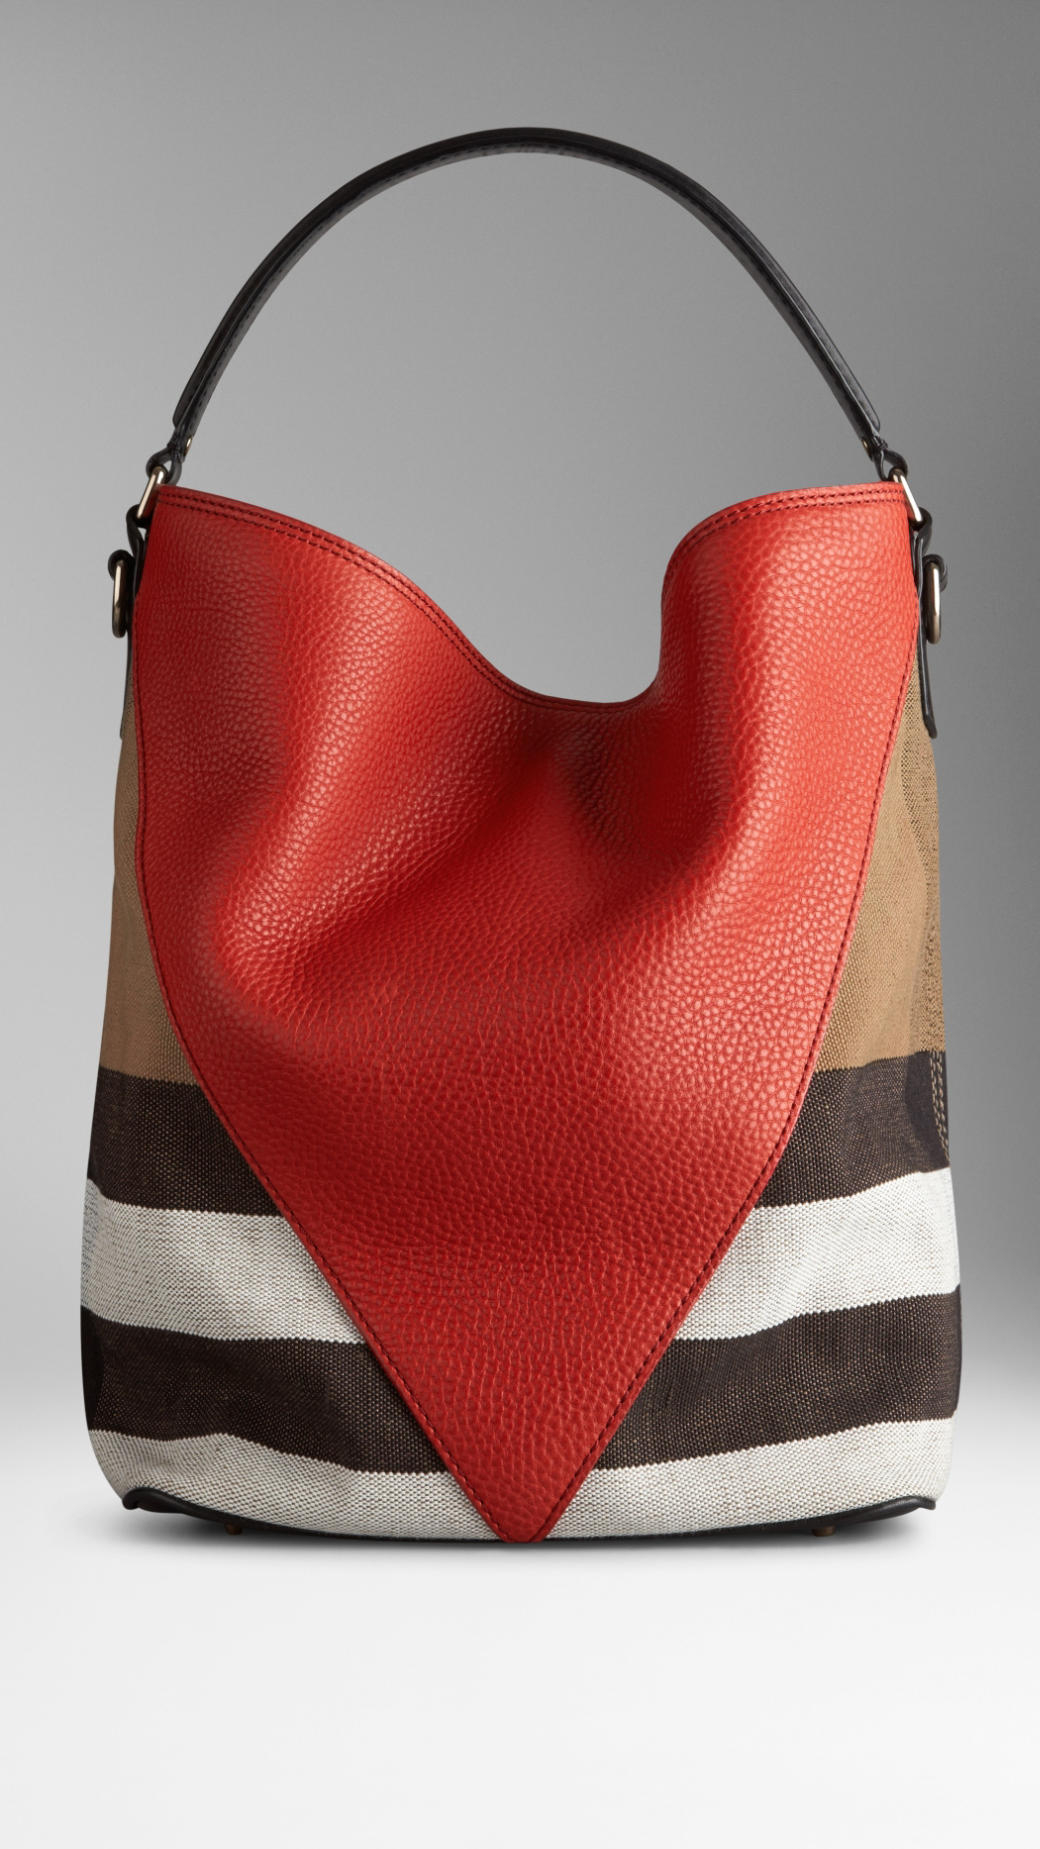 Burberry Medium Canvas Check Leather Chevron Hobo Bag in Military Red/Black (Red) - Lyst